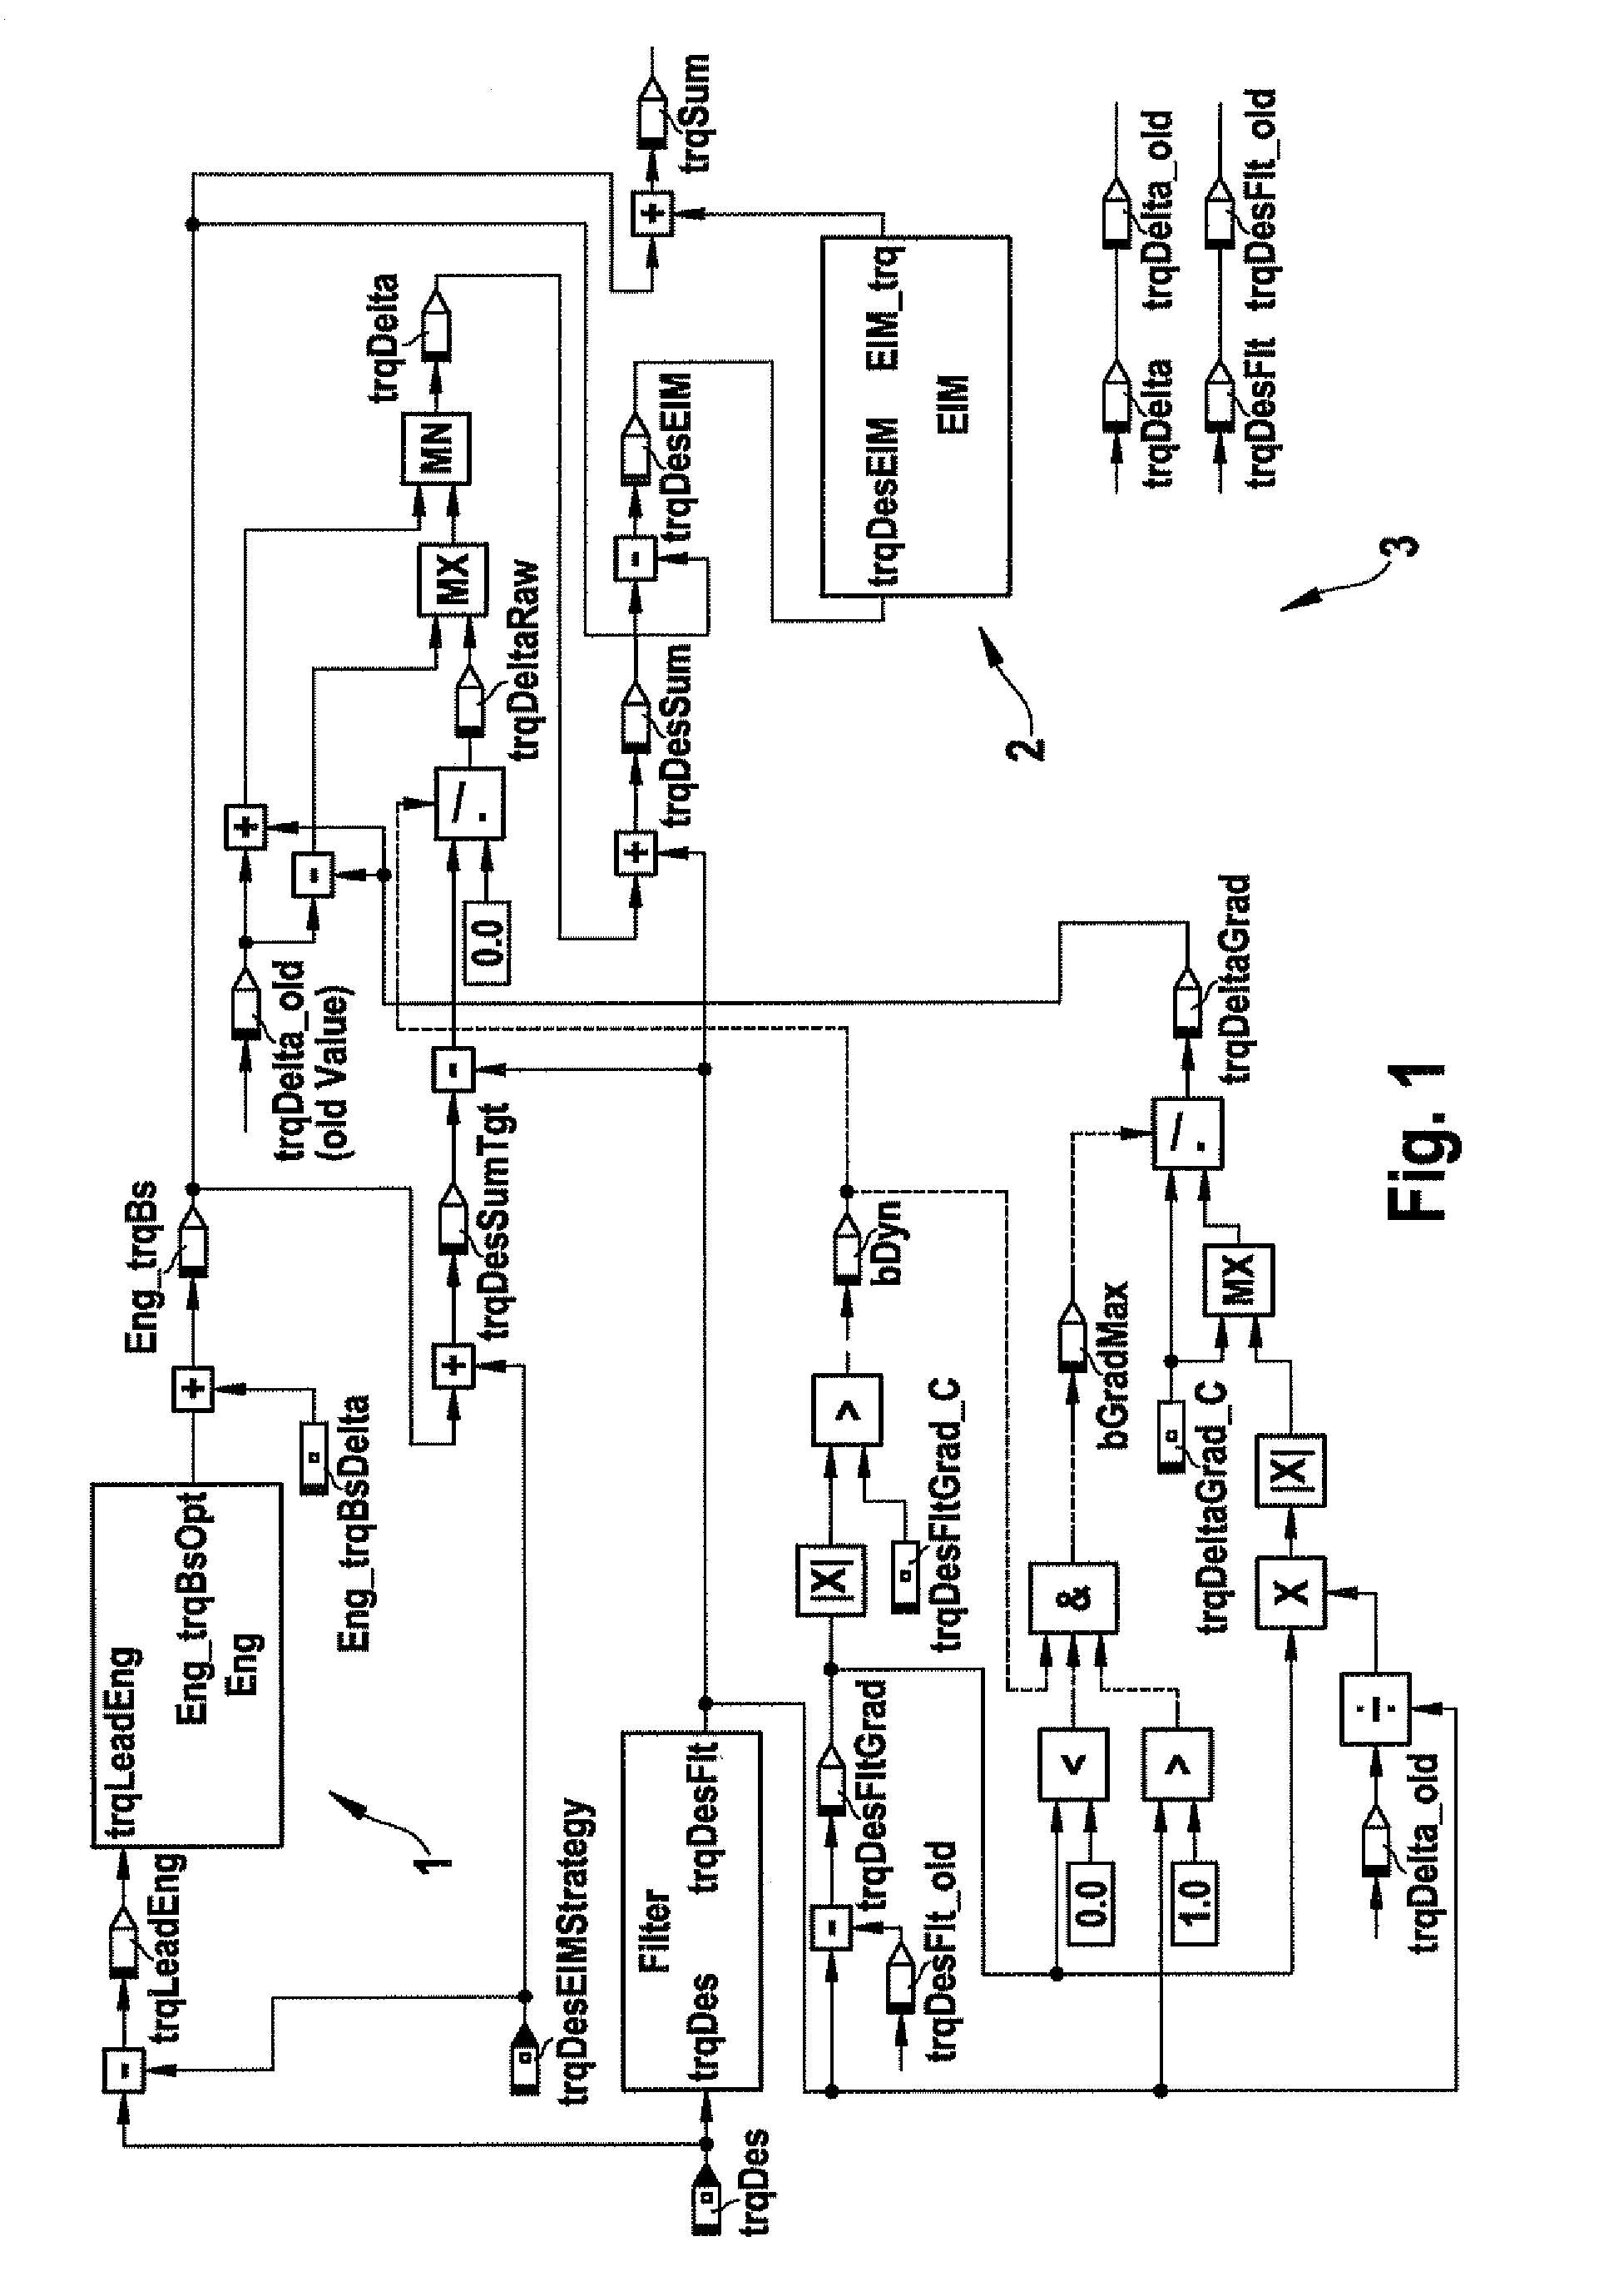 Method for operating a drive device, in particular a hybrid drive device